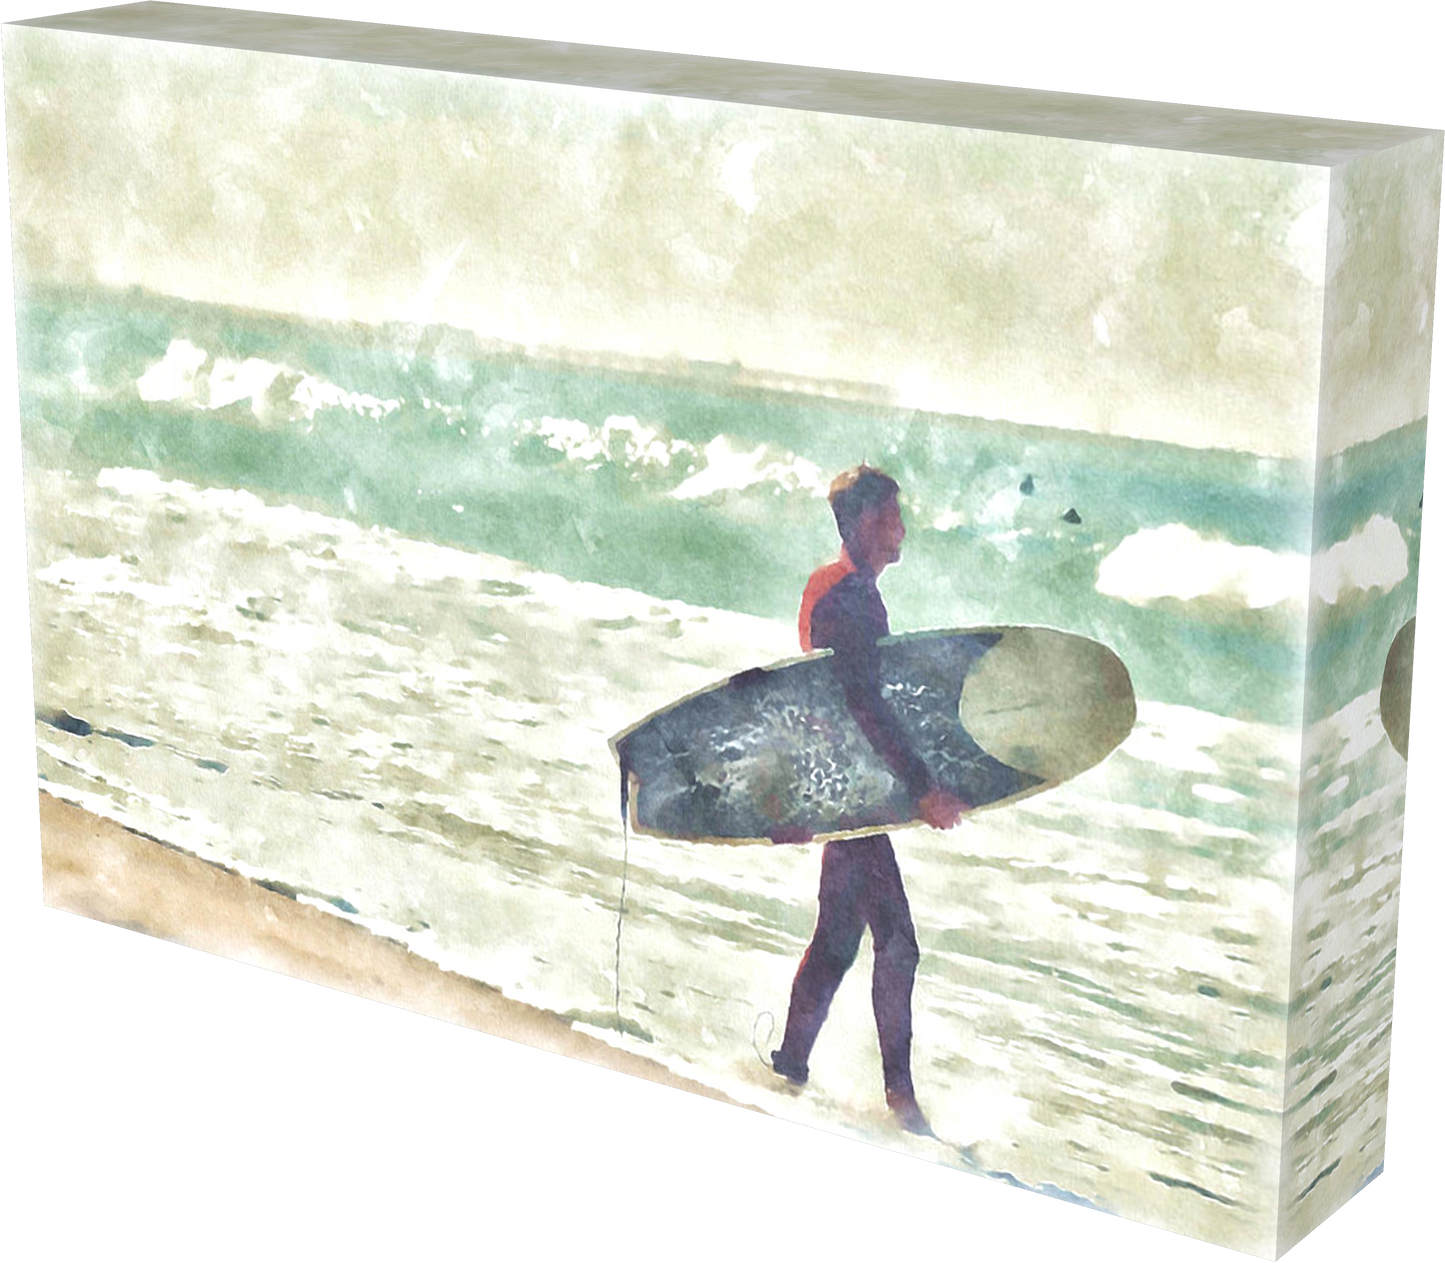 Heading out to Surf Mission Beach  - Canvas Print